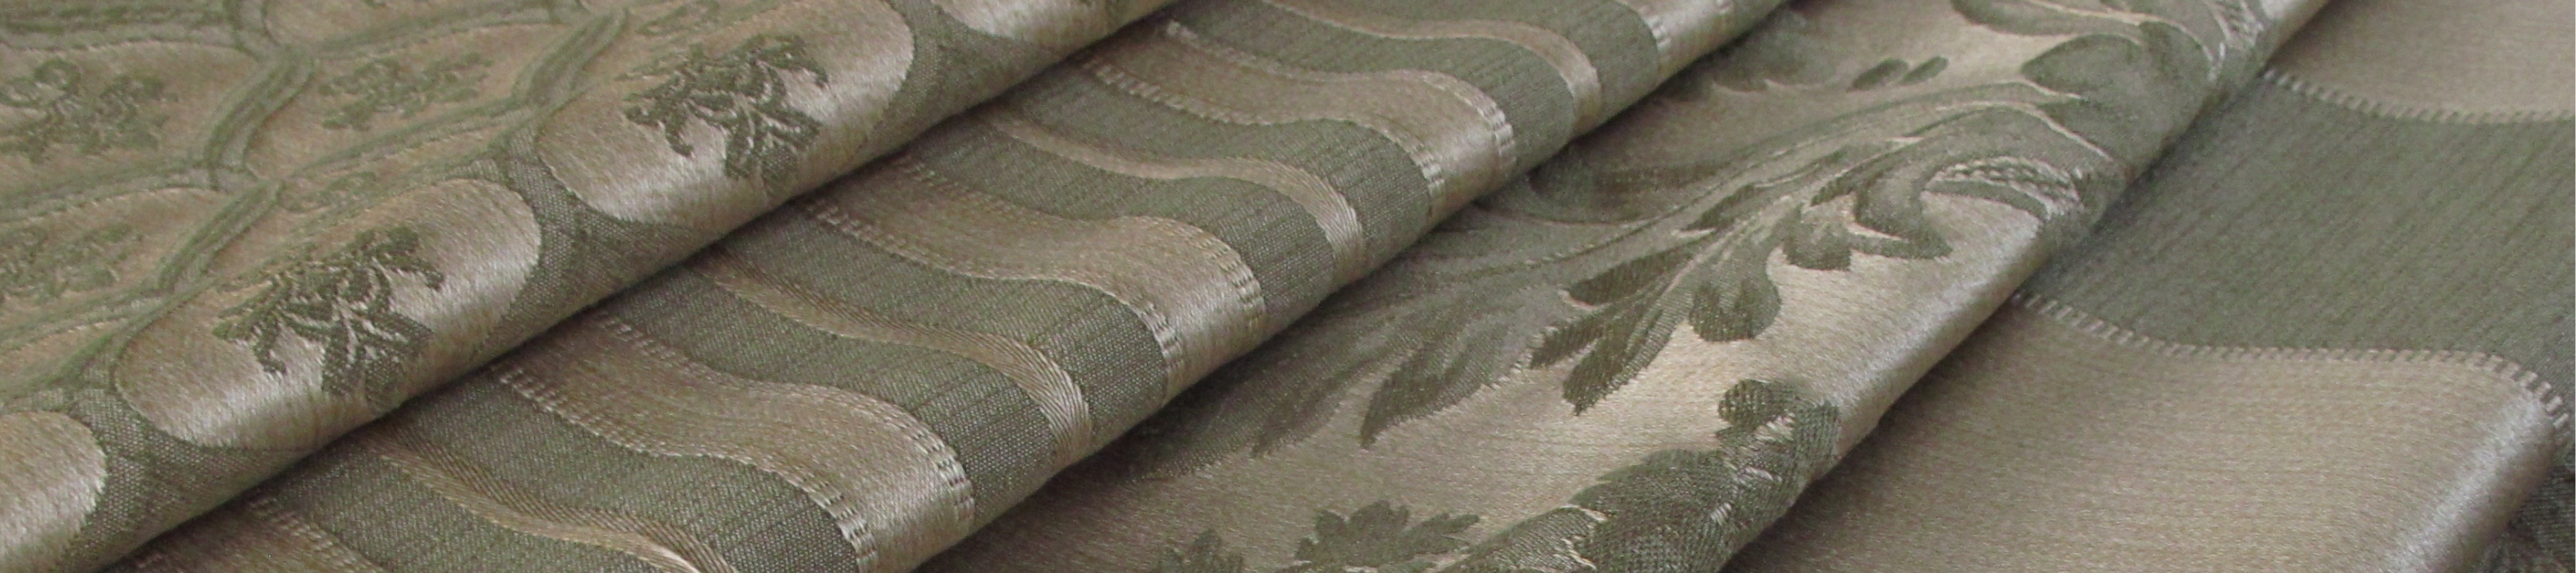 grey and green curtain fabric